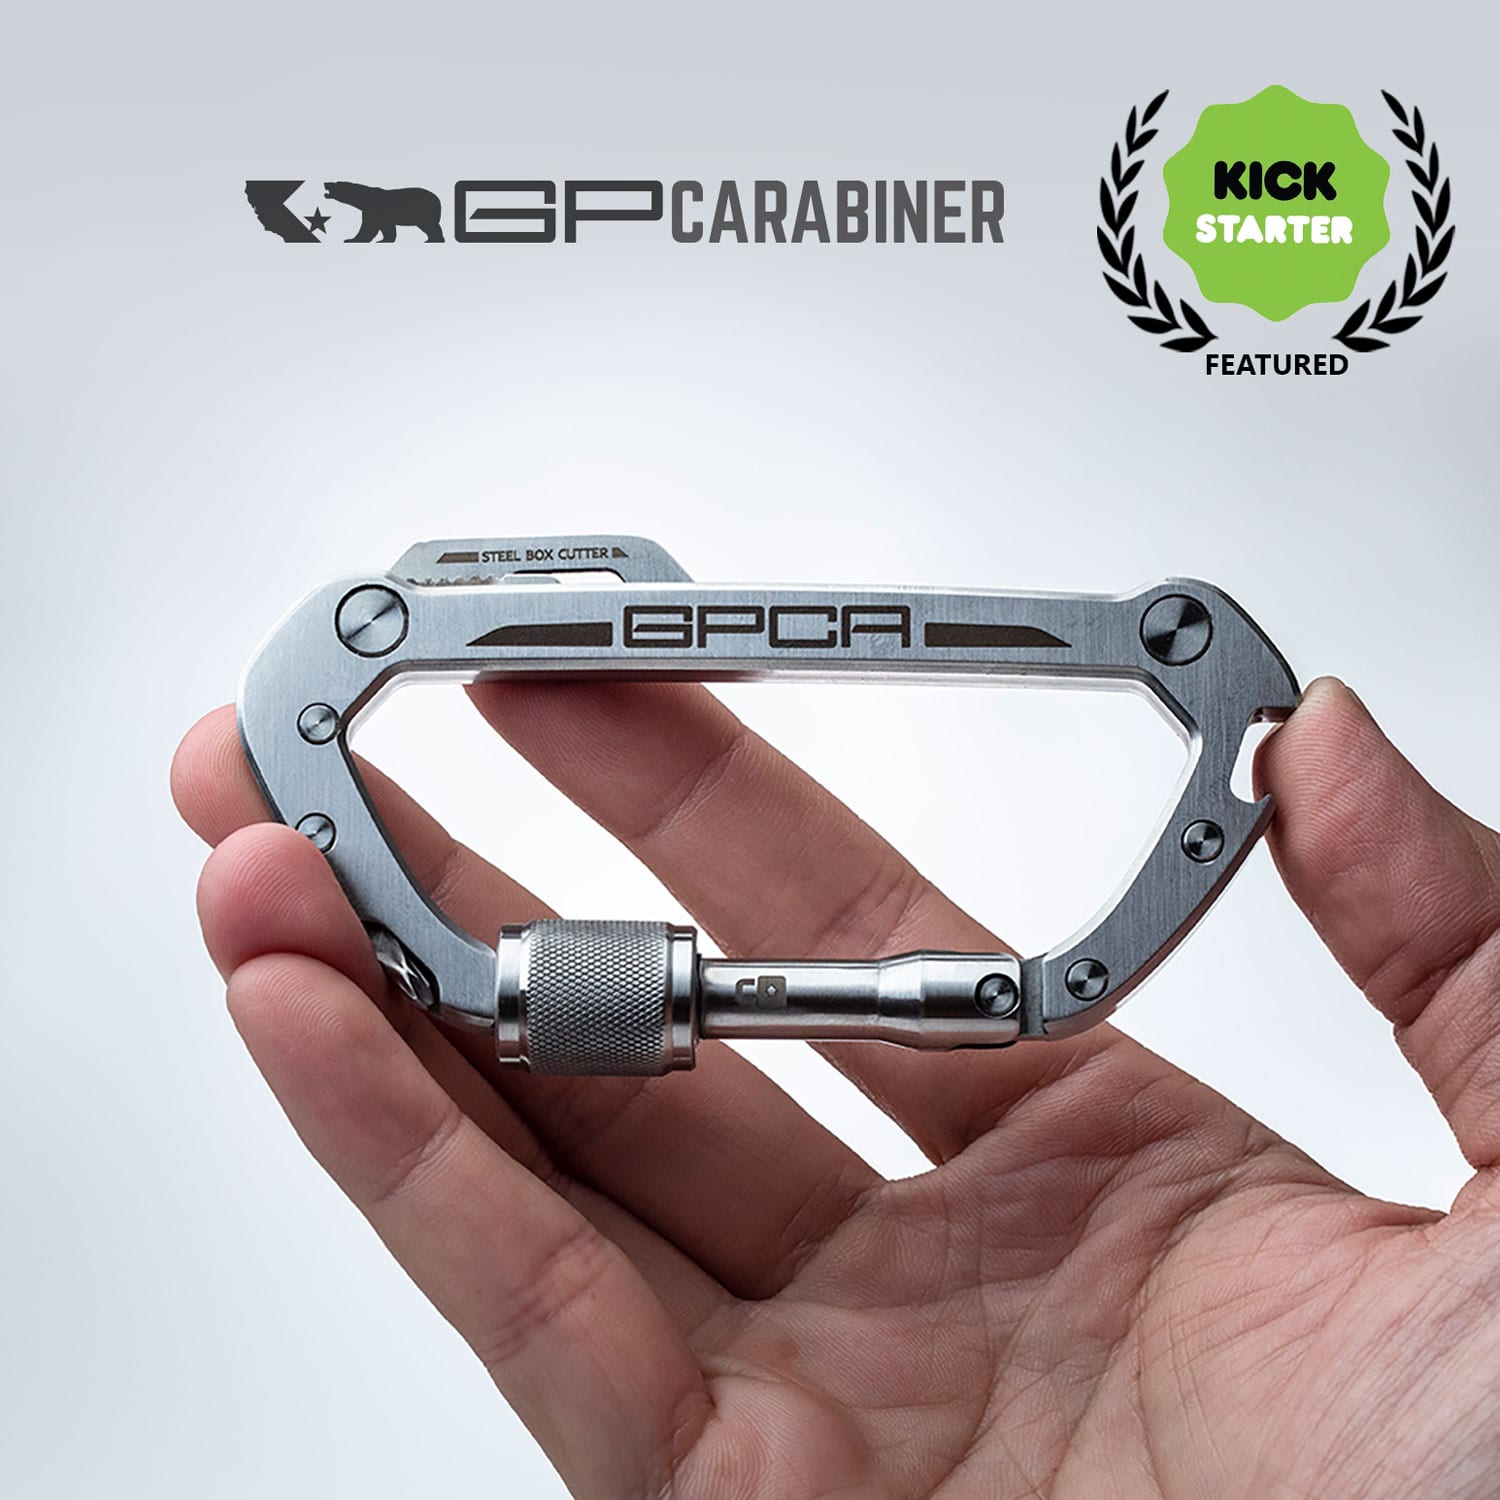 Shop for and Buy Small Carabiner Keychain at . Large selection  and bulk discounts available.